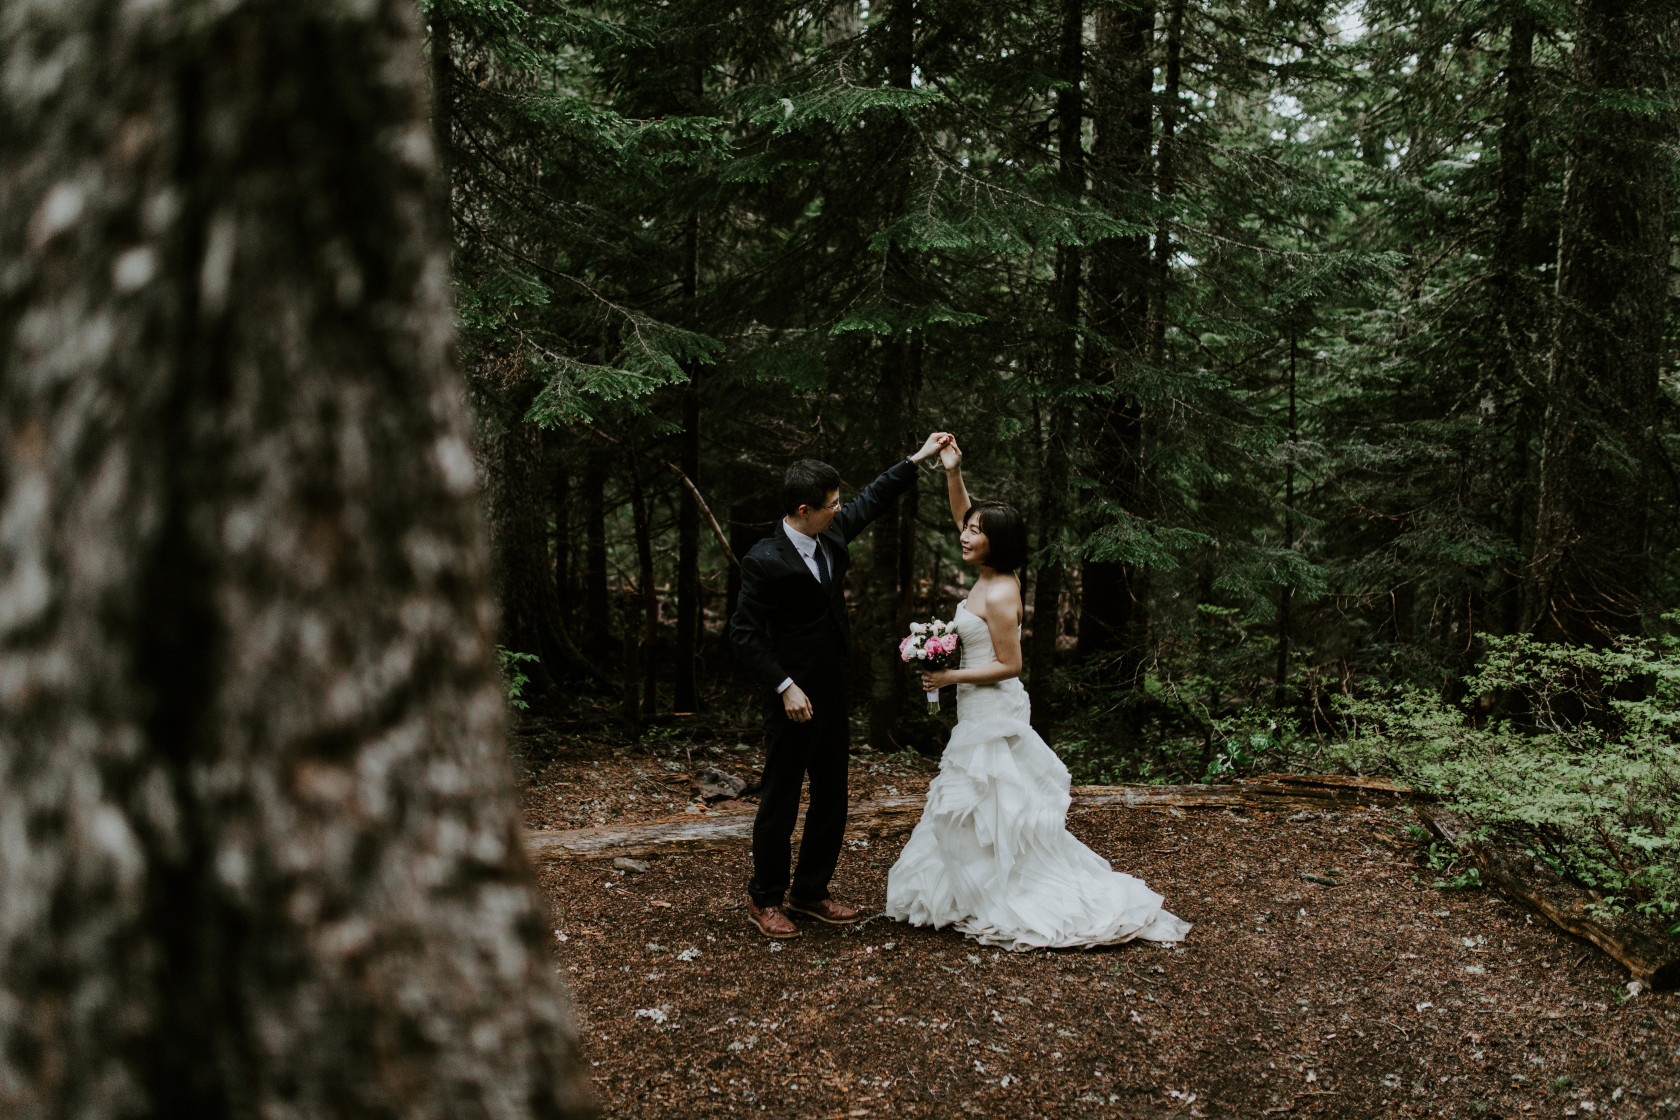 Alex and Valerie dance in the middle of the woods near Mount Hood. Elopement wedding photography at Mount Hood by Sienna Plus Josh.